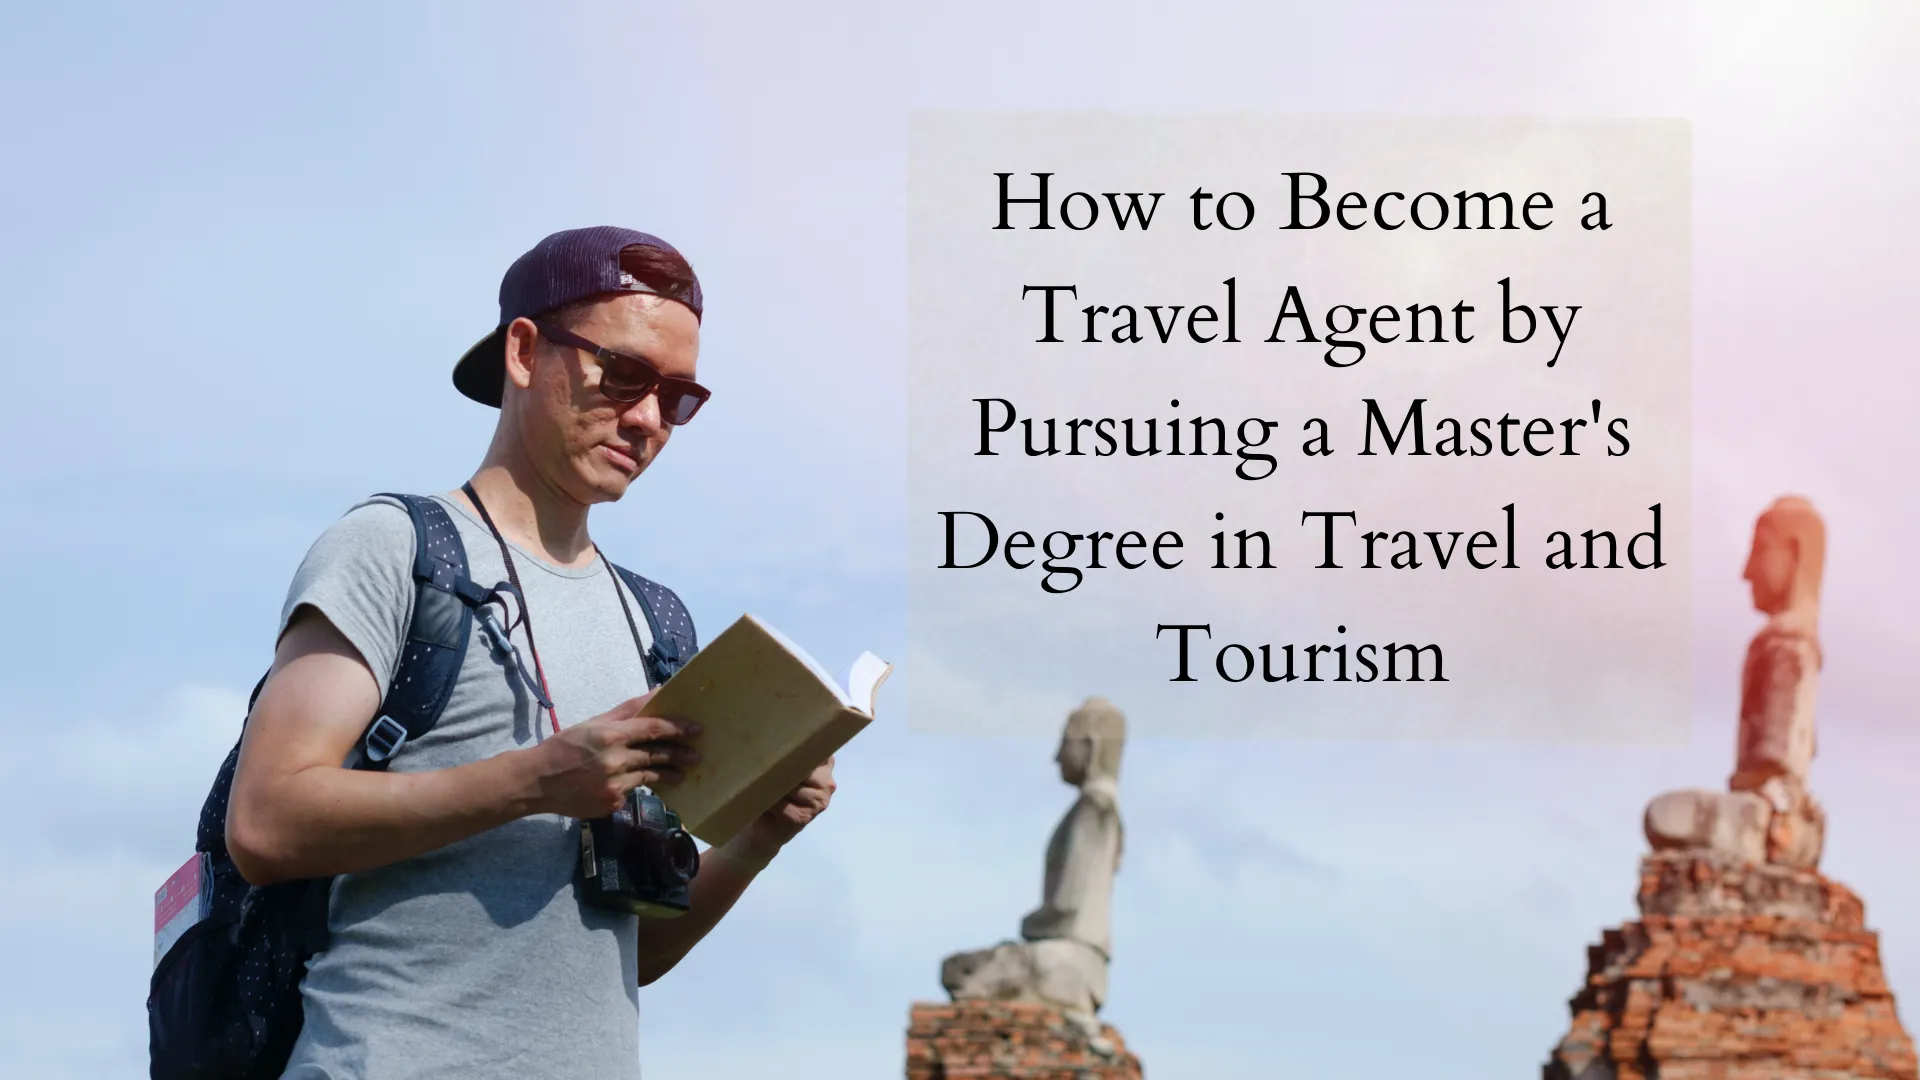 How to a Travel Agent by Pursuing a Master's Degree in Travel